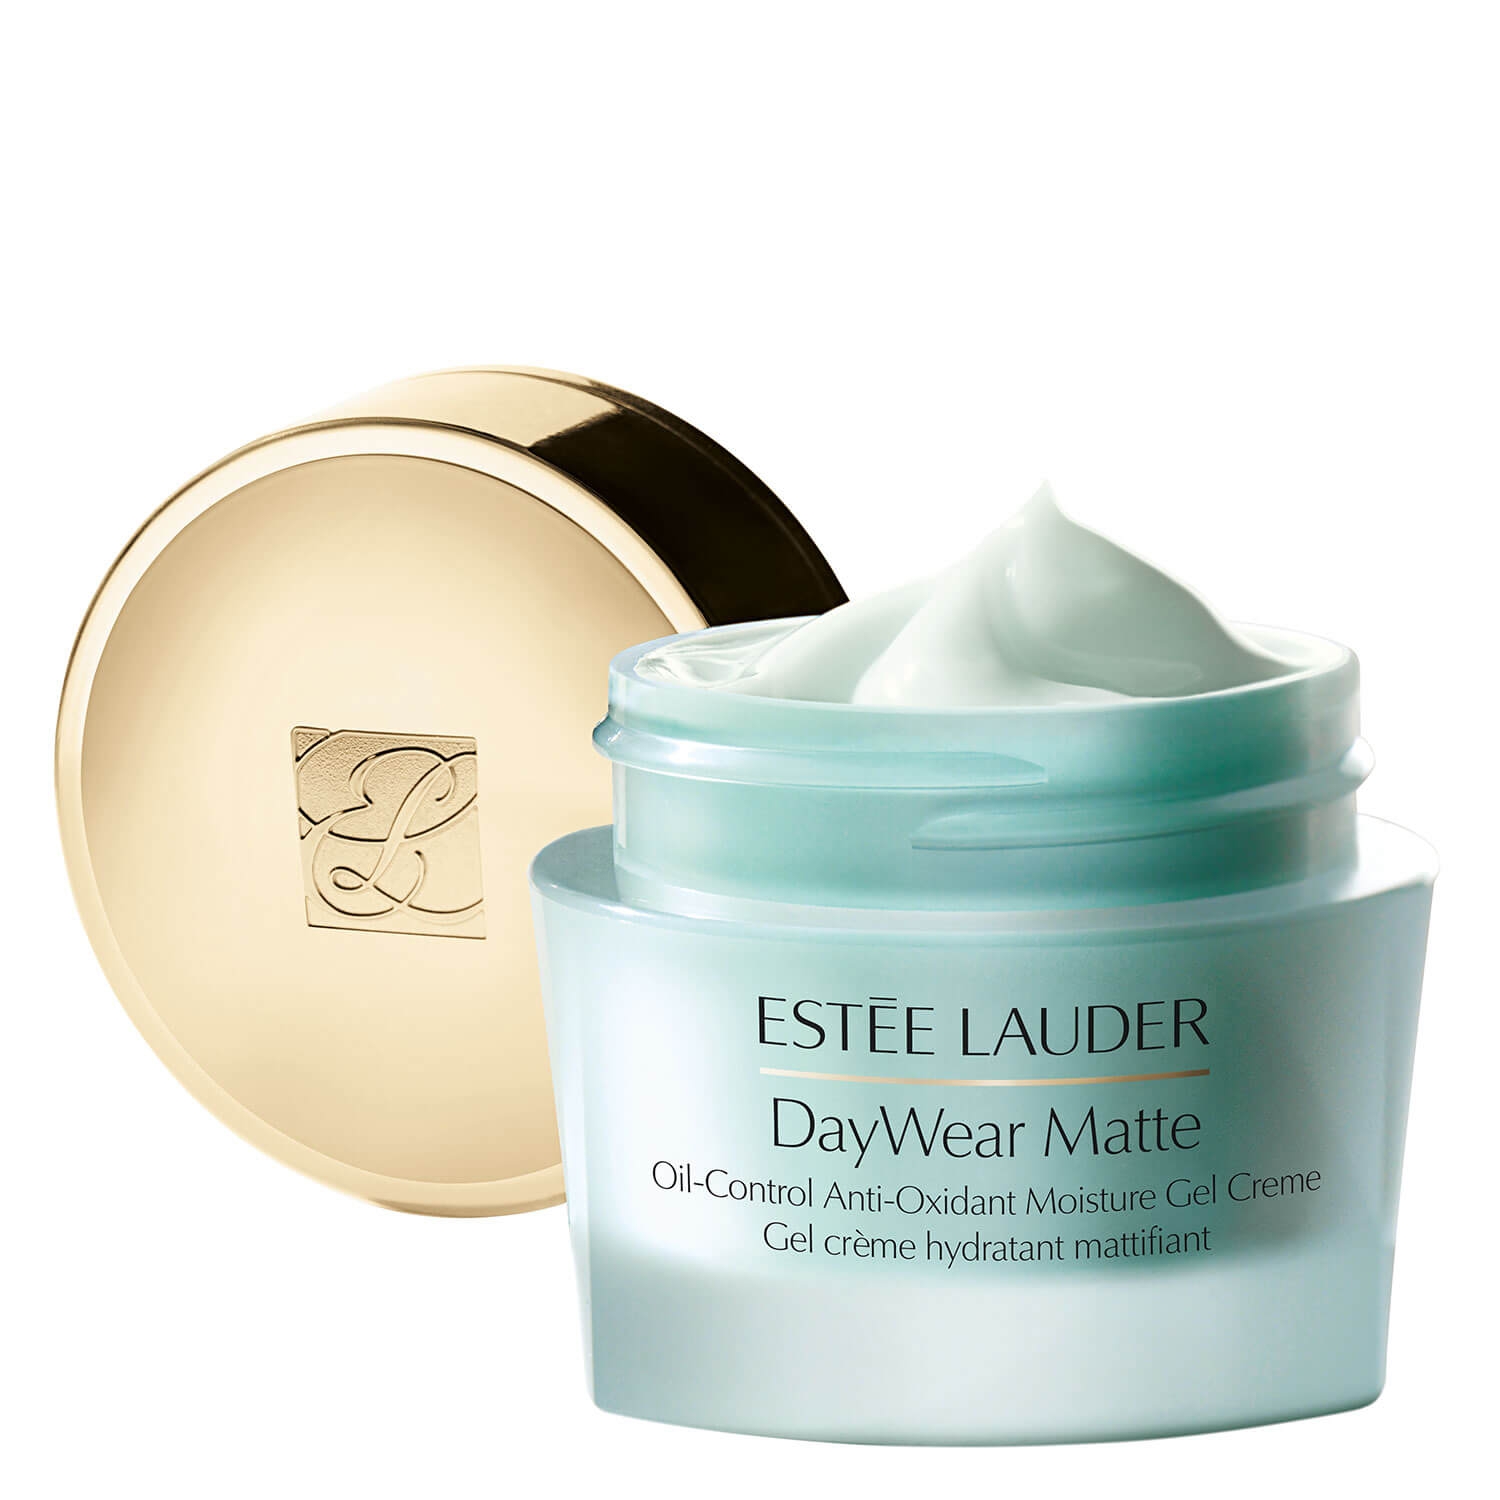 Product image from DayWear - Matte Oil-Control Anti-Oxidant Moisture Gel Creme